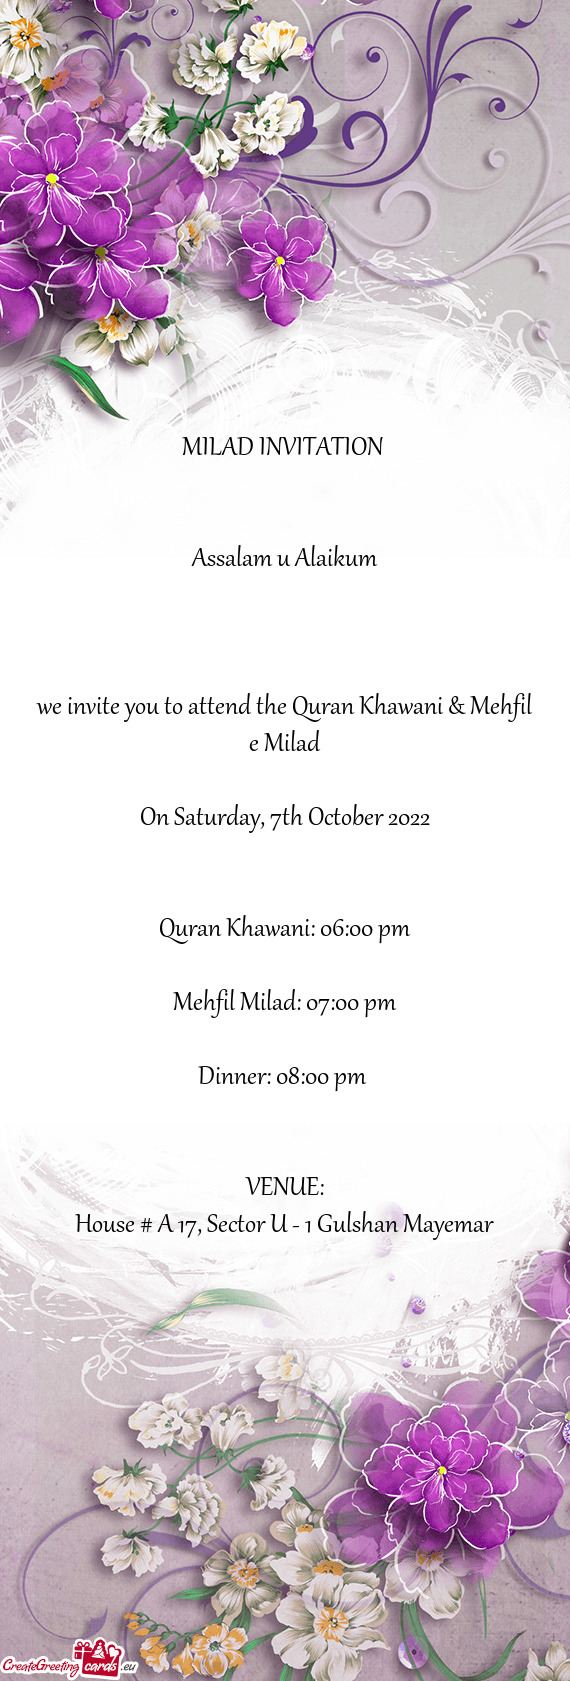 We invite you to attend the Quran Khawani & Mehfil e Milad